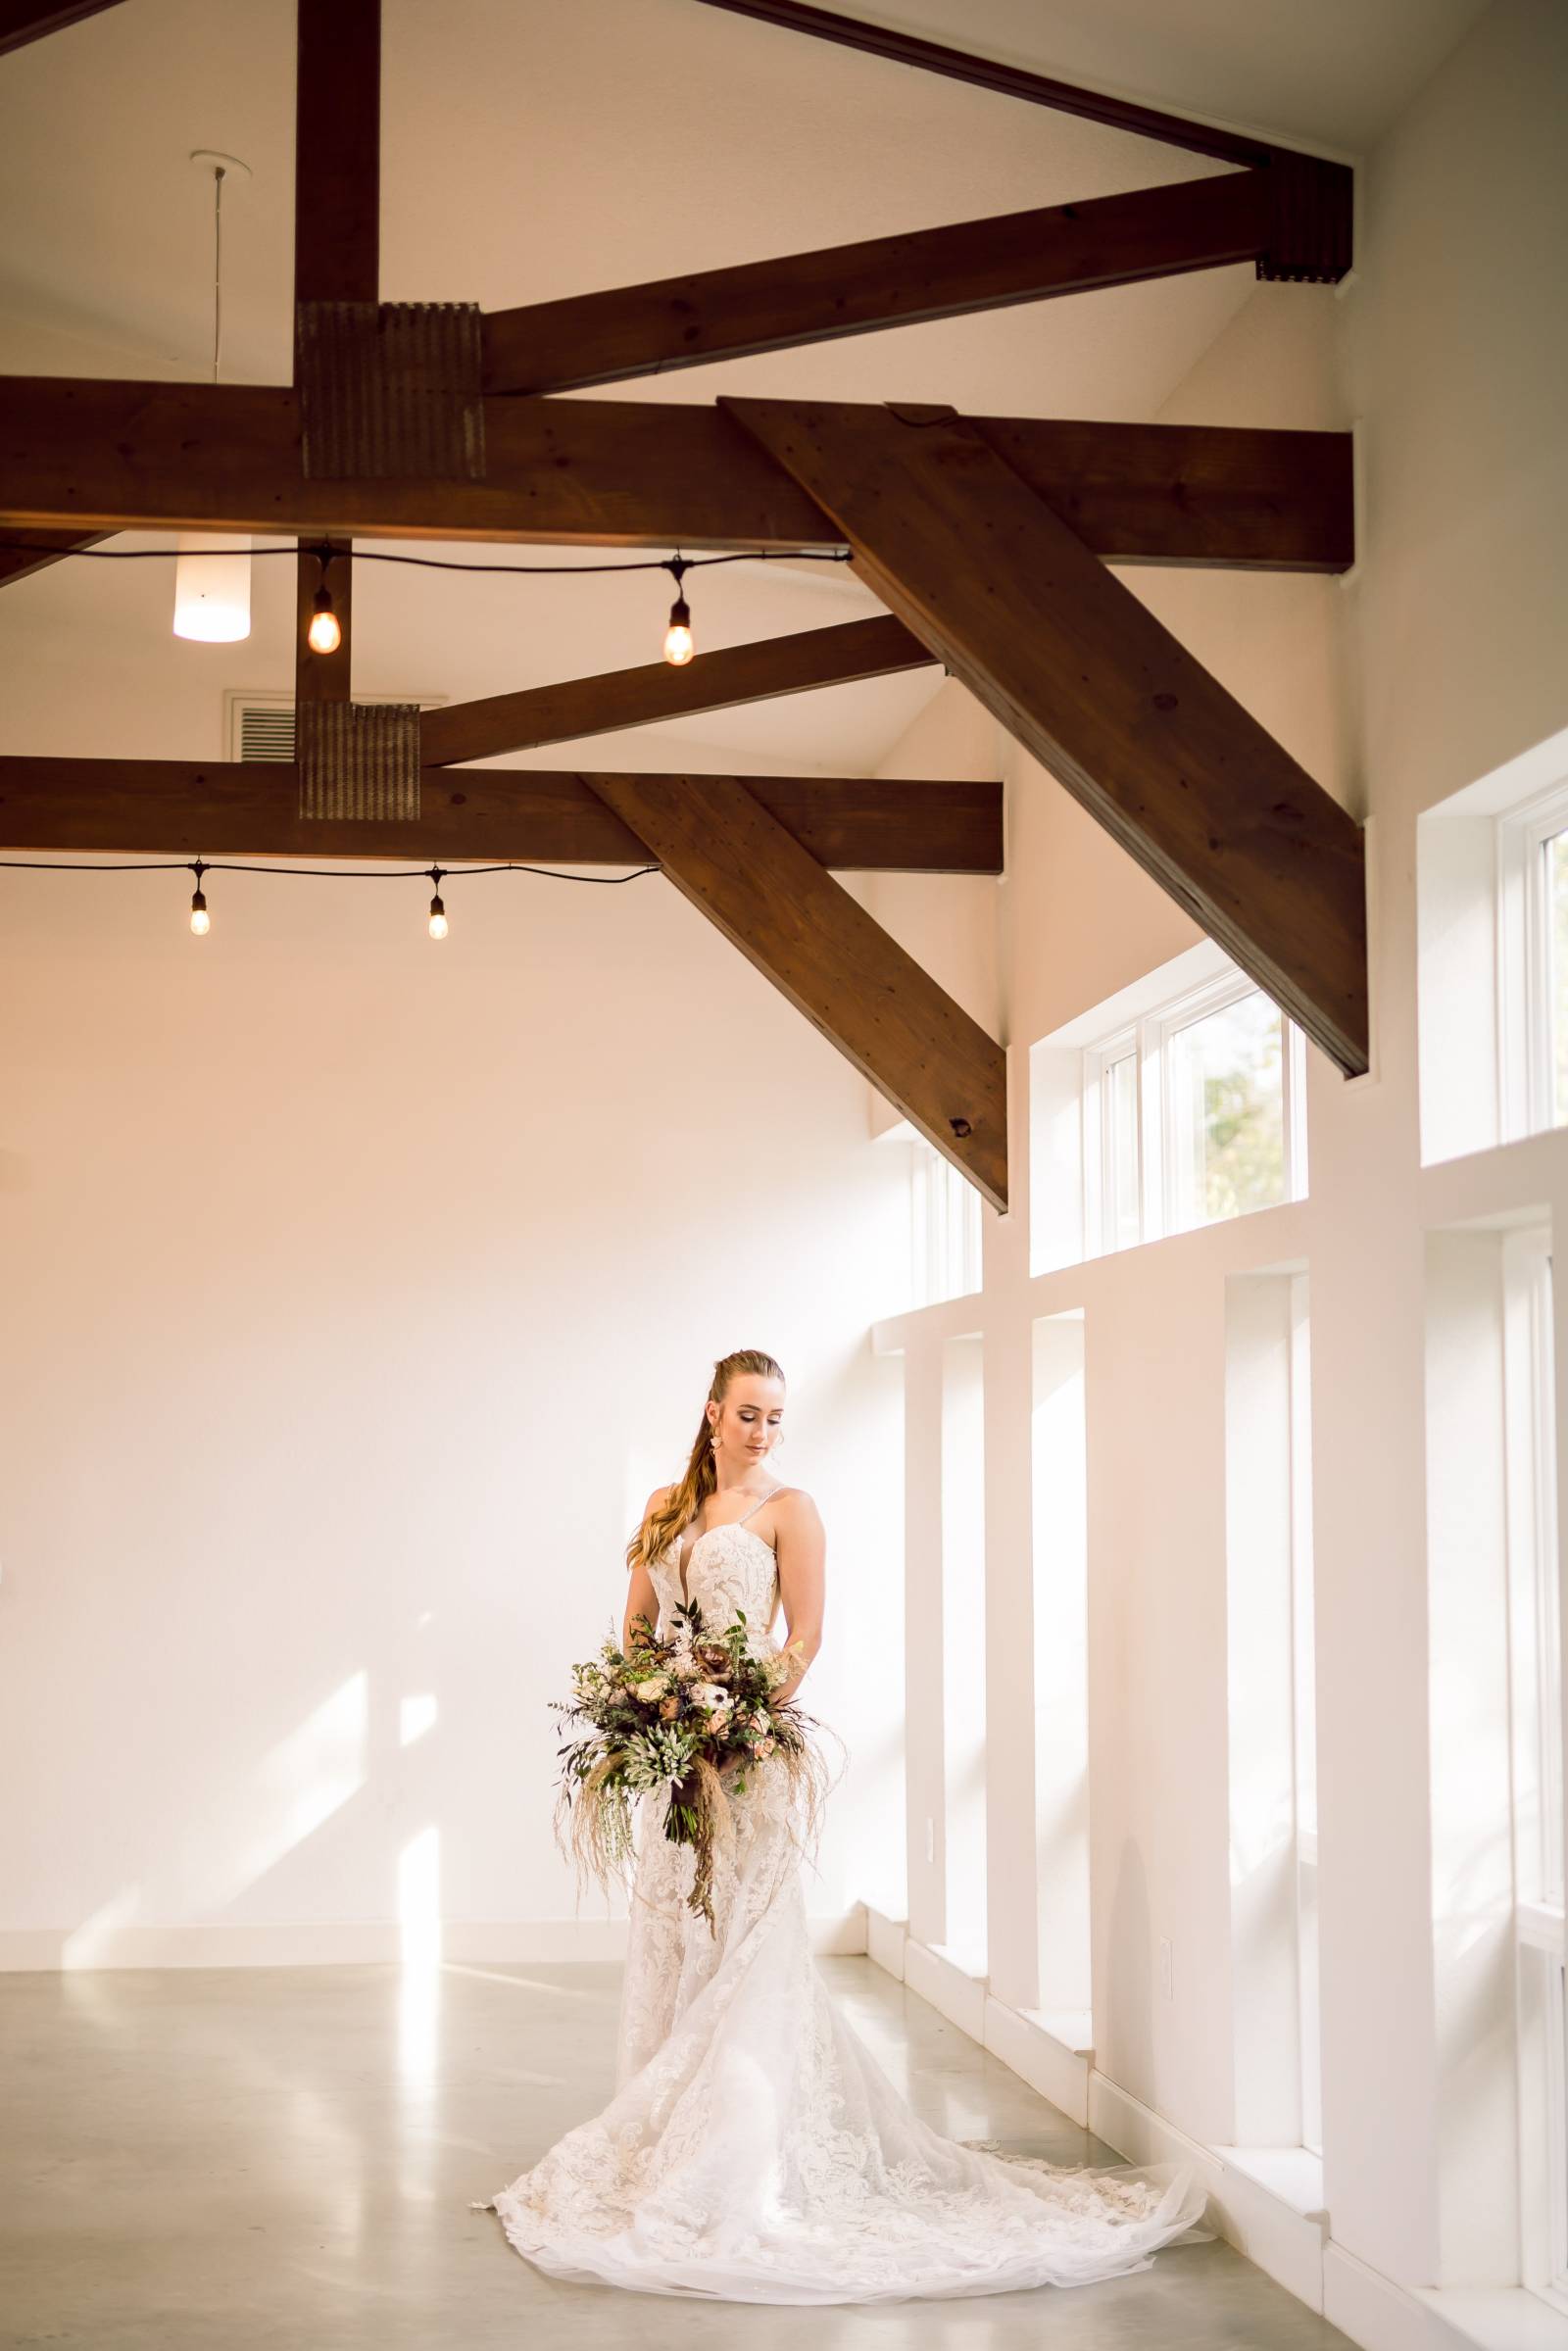 White wedding venue with exposed beams